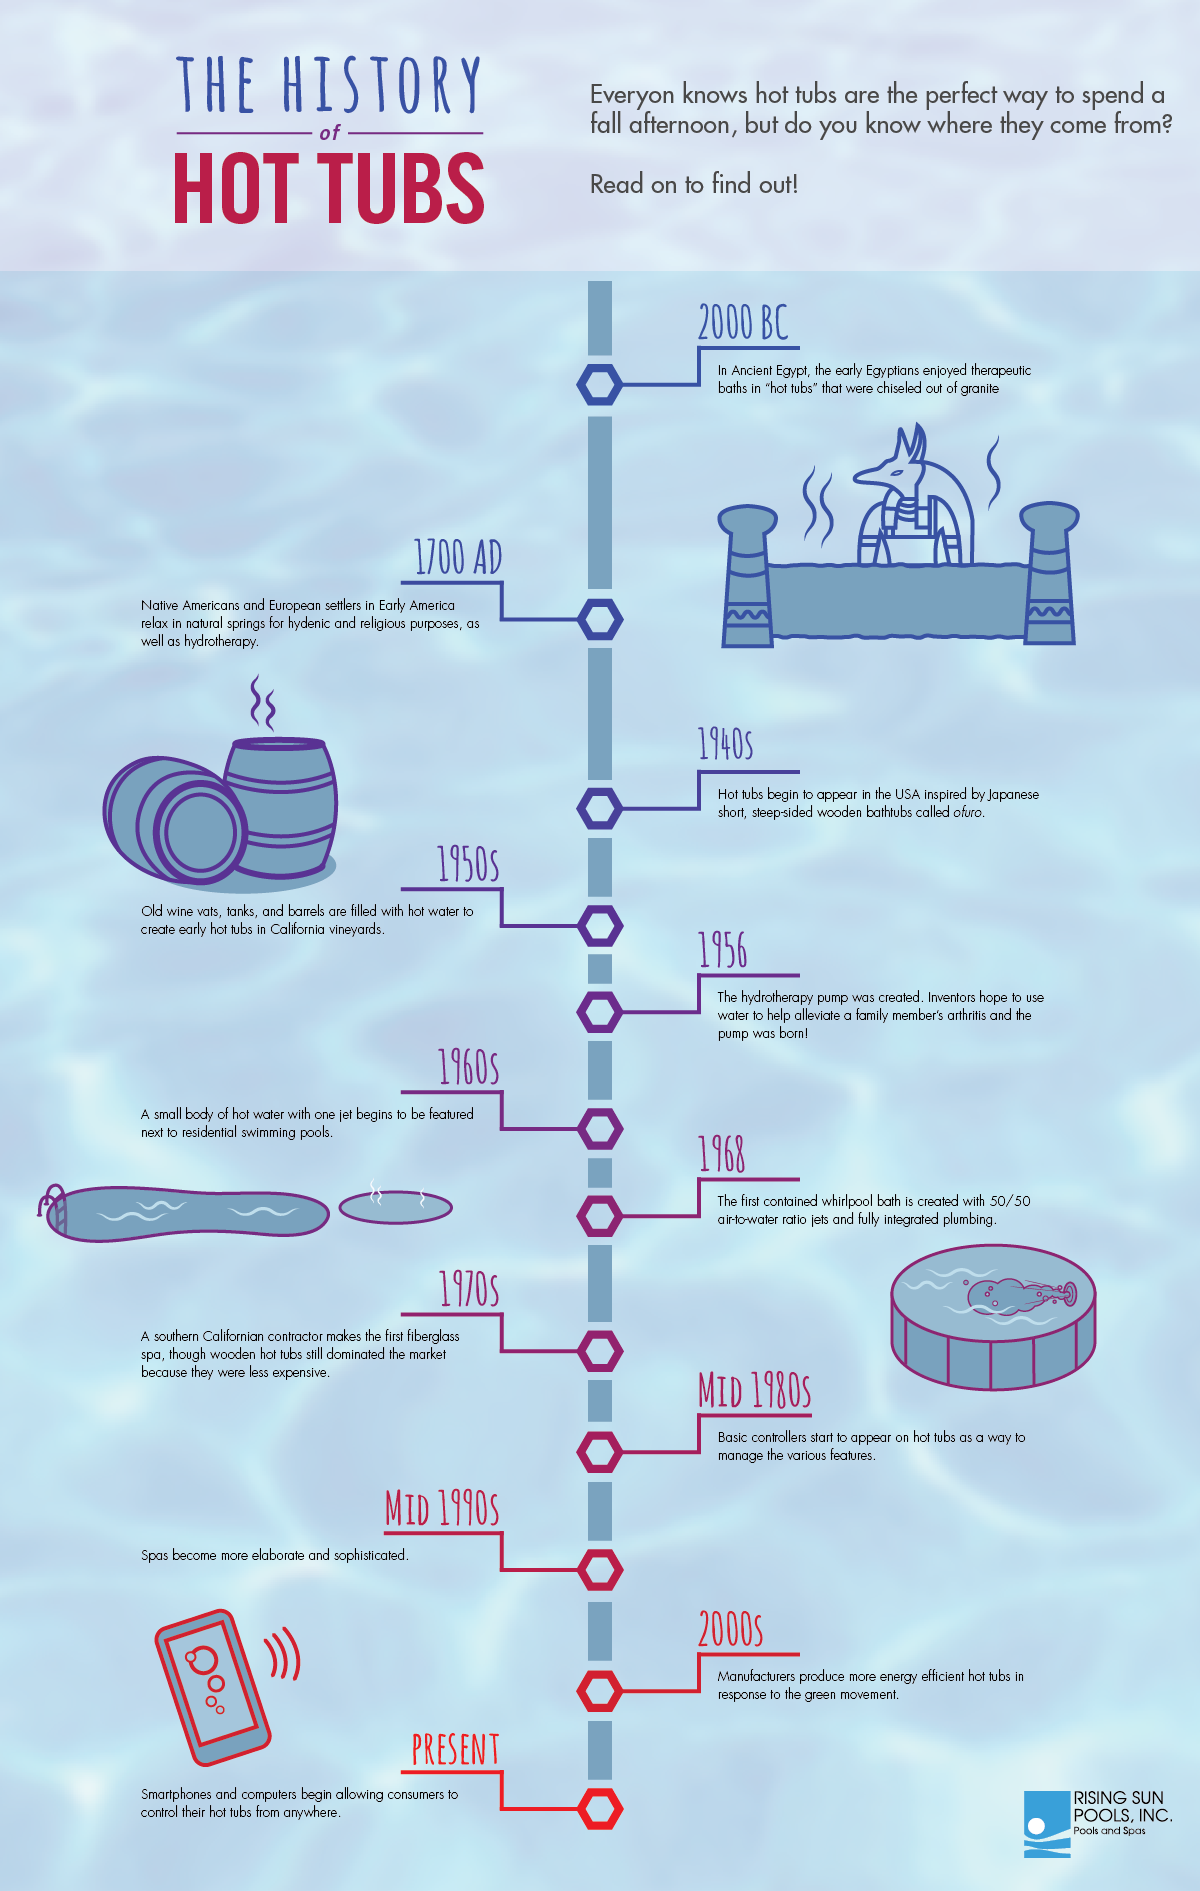 The History of Hot Tubs